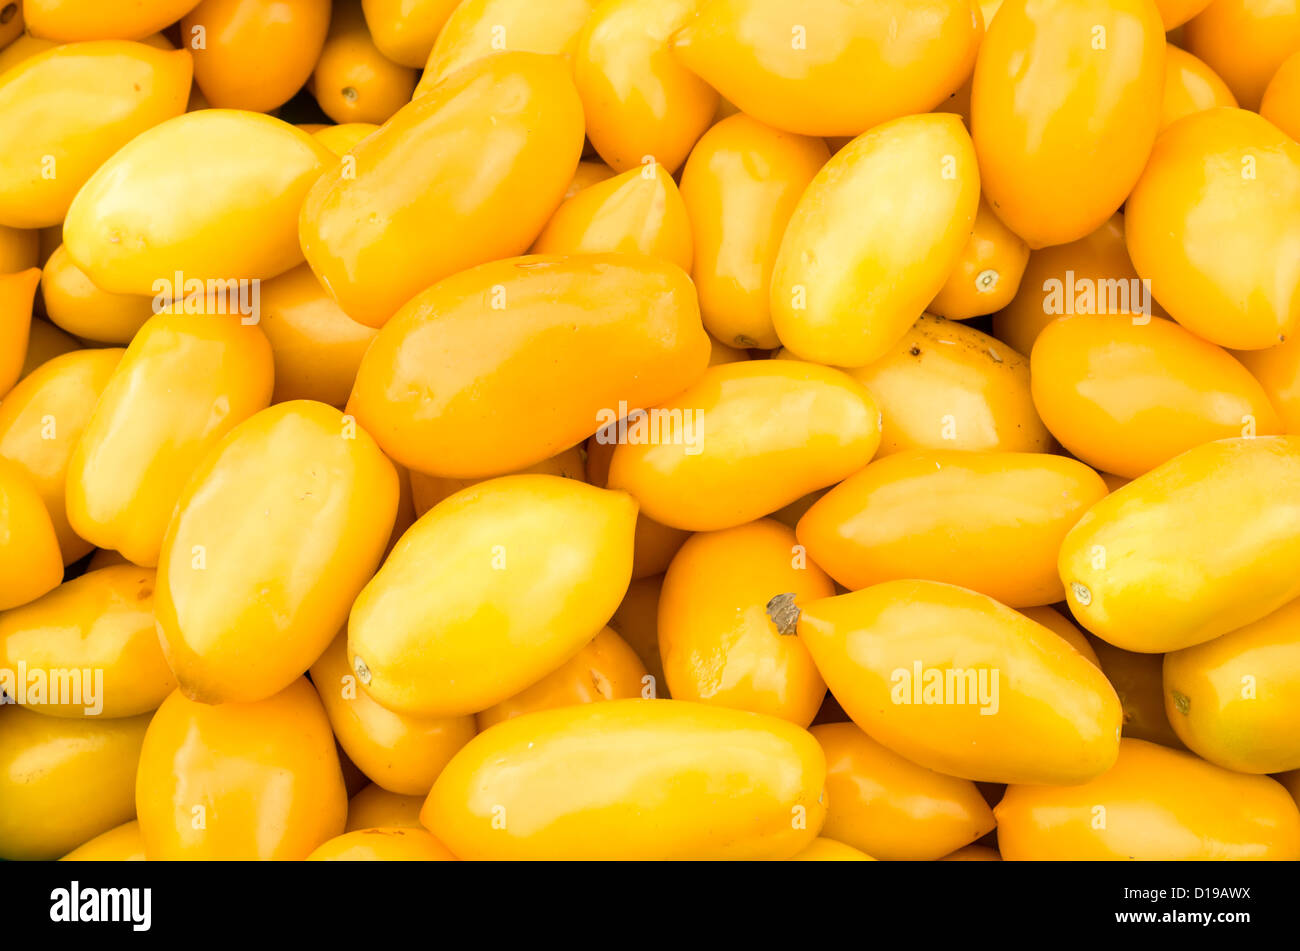 Yellow pear tomatoes on display at the market Stock Photo